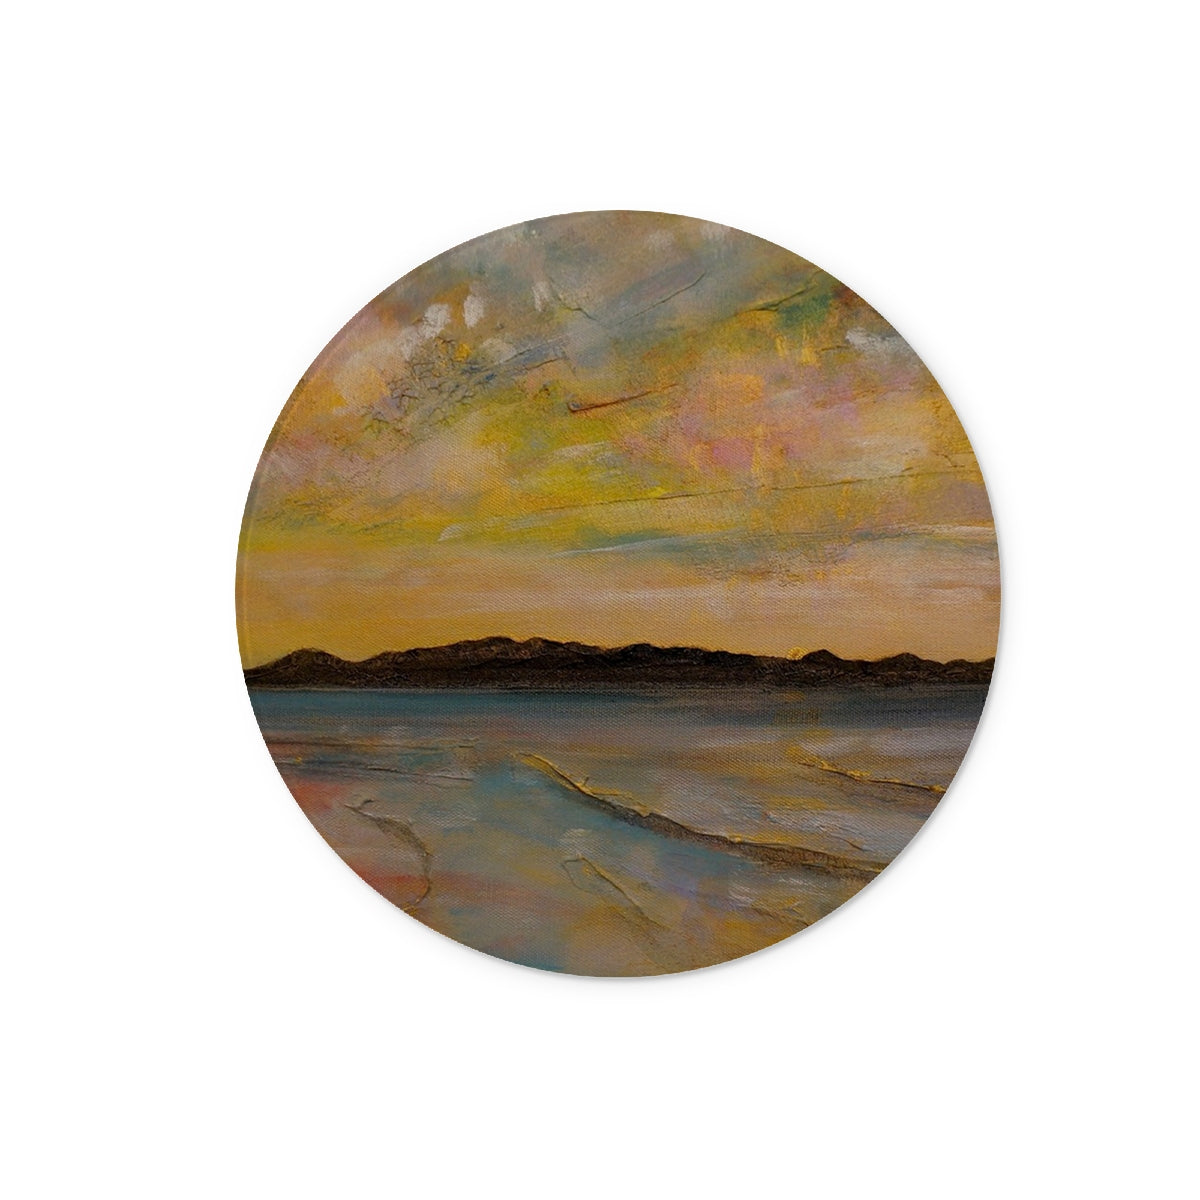 Vallay Island North Uist Art Gifts Glass Chopping Board-Glass Chopping Boards-Hebridean Islands Art Gallery-12" Round-Paintings, Prints, Homeware, Art Gifts From Scotland By Scottish Artist Kevin Hunter